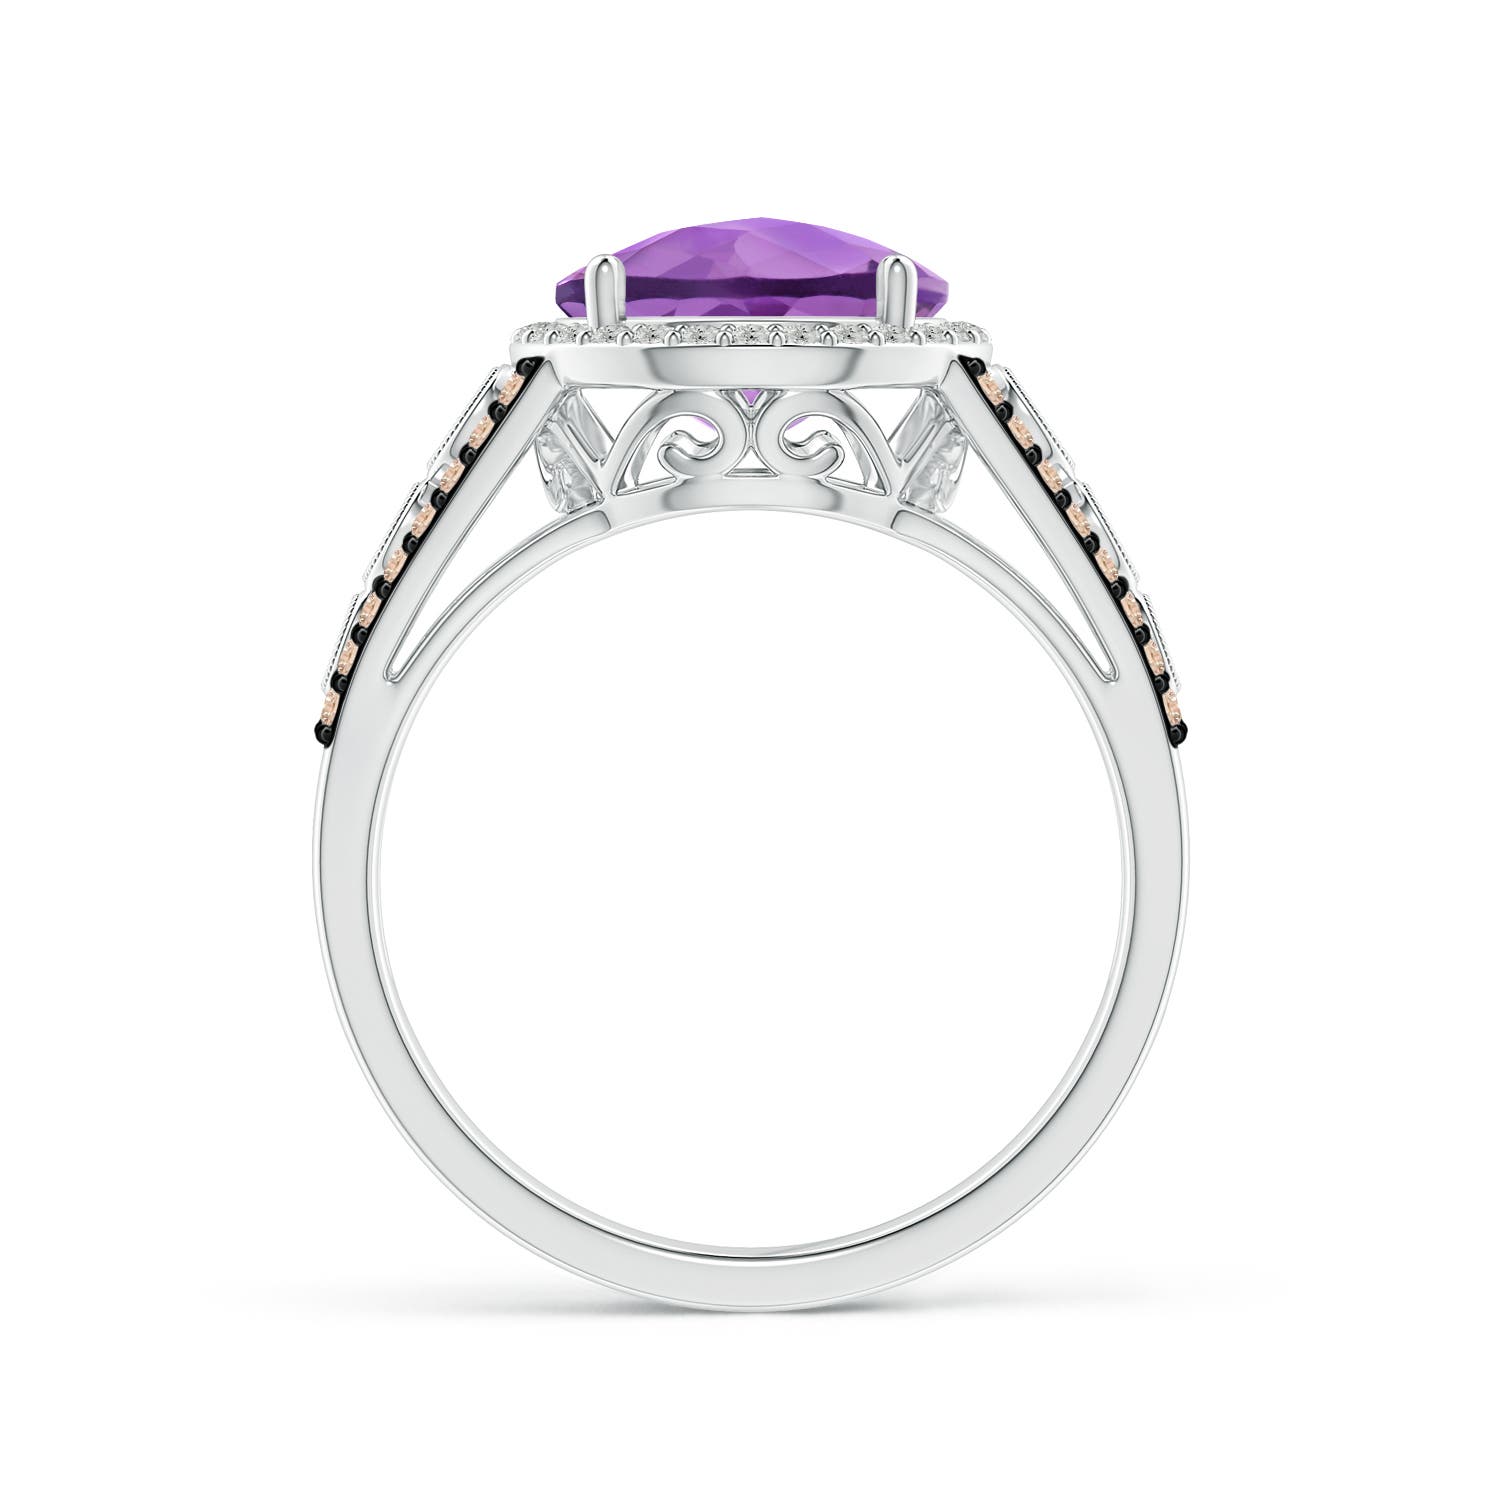 A - Amethyst / 2.64 CT / 14 KT White Gold